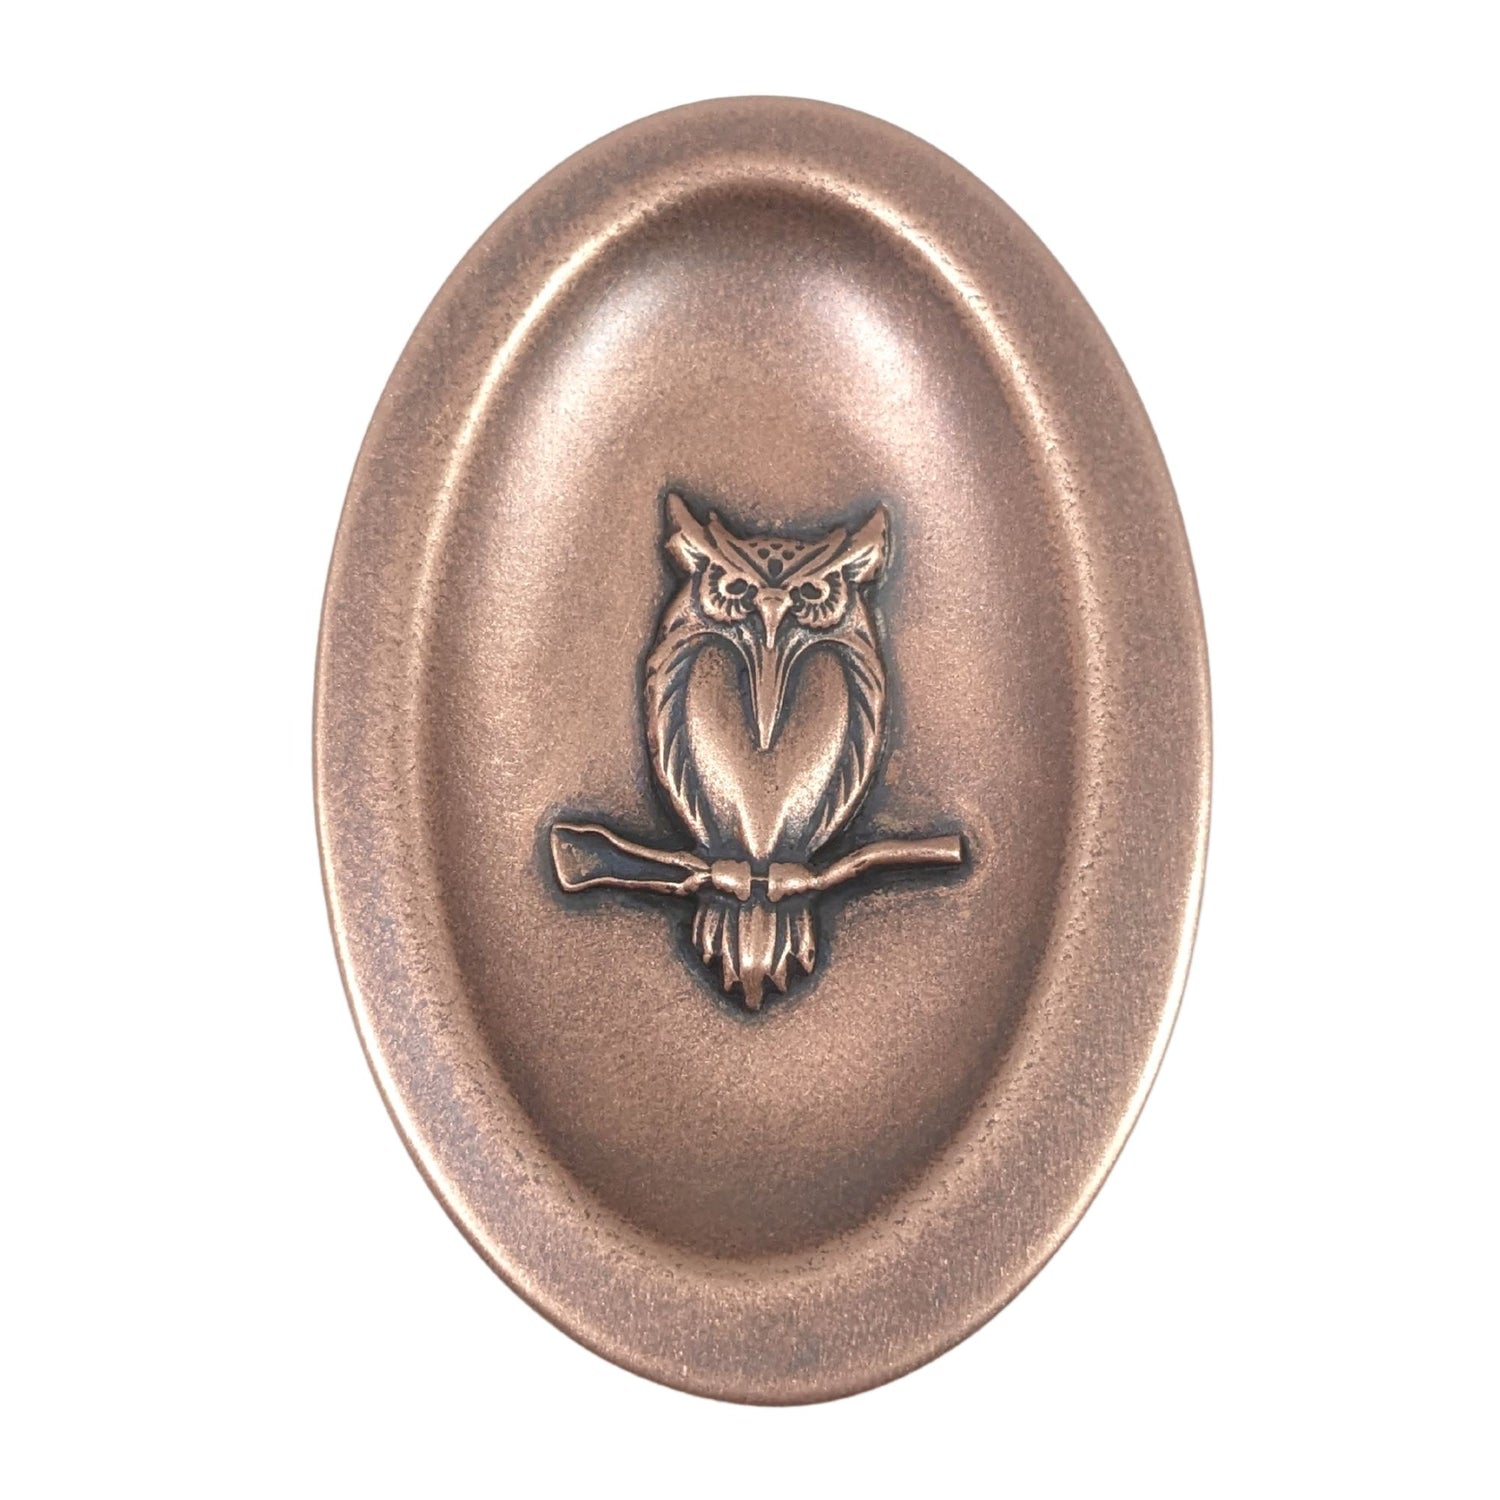 Oval ring dish made of copper. The dish has a shallow bowl with a lip around the edge. Centered on the bottom of the dish is a three-dimensional design of an owl, also made of copper. The owl is facing straight ahead and is perched on a branch. The breast is smooth and shaped like a long narrow heart. The owl hd large eyes, a pointed beak, tufted ears, and feathers around the breast and on the tail.  The design is oxidized, which means the recessed parts of the owl are dark, almost black.